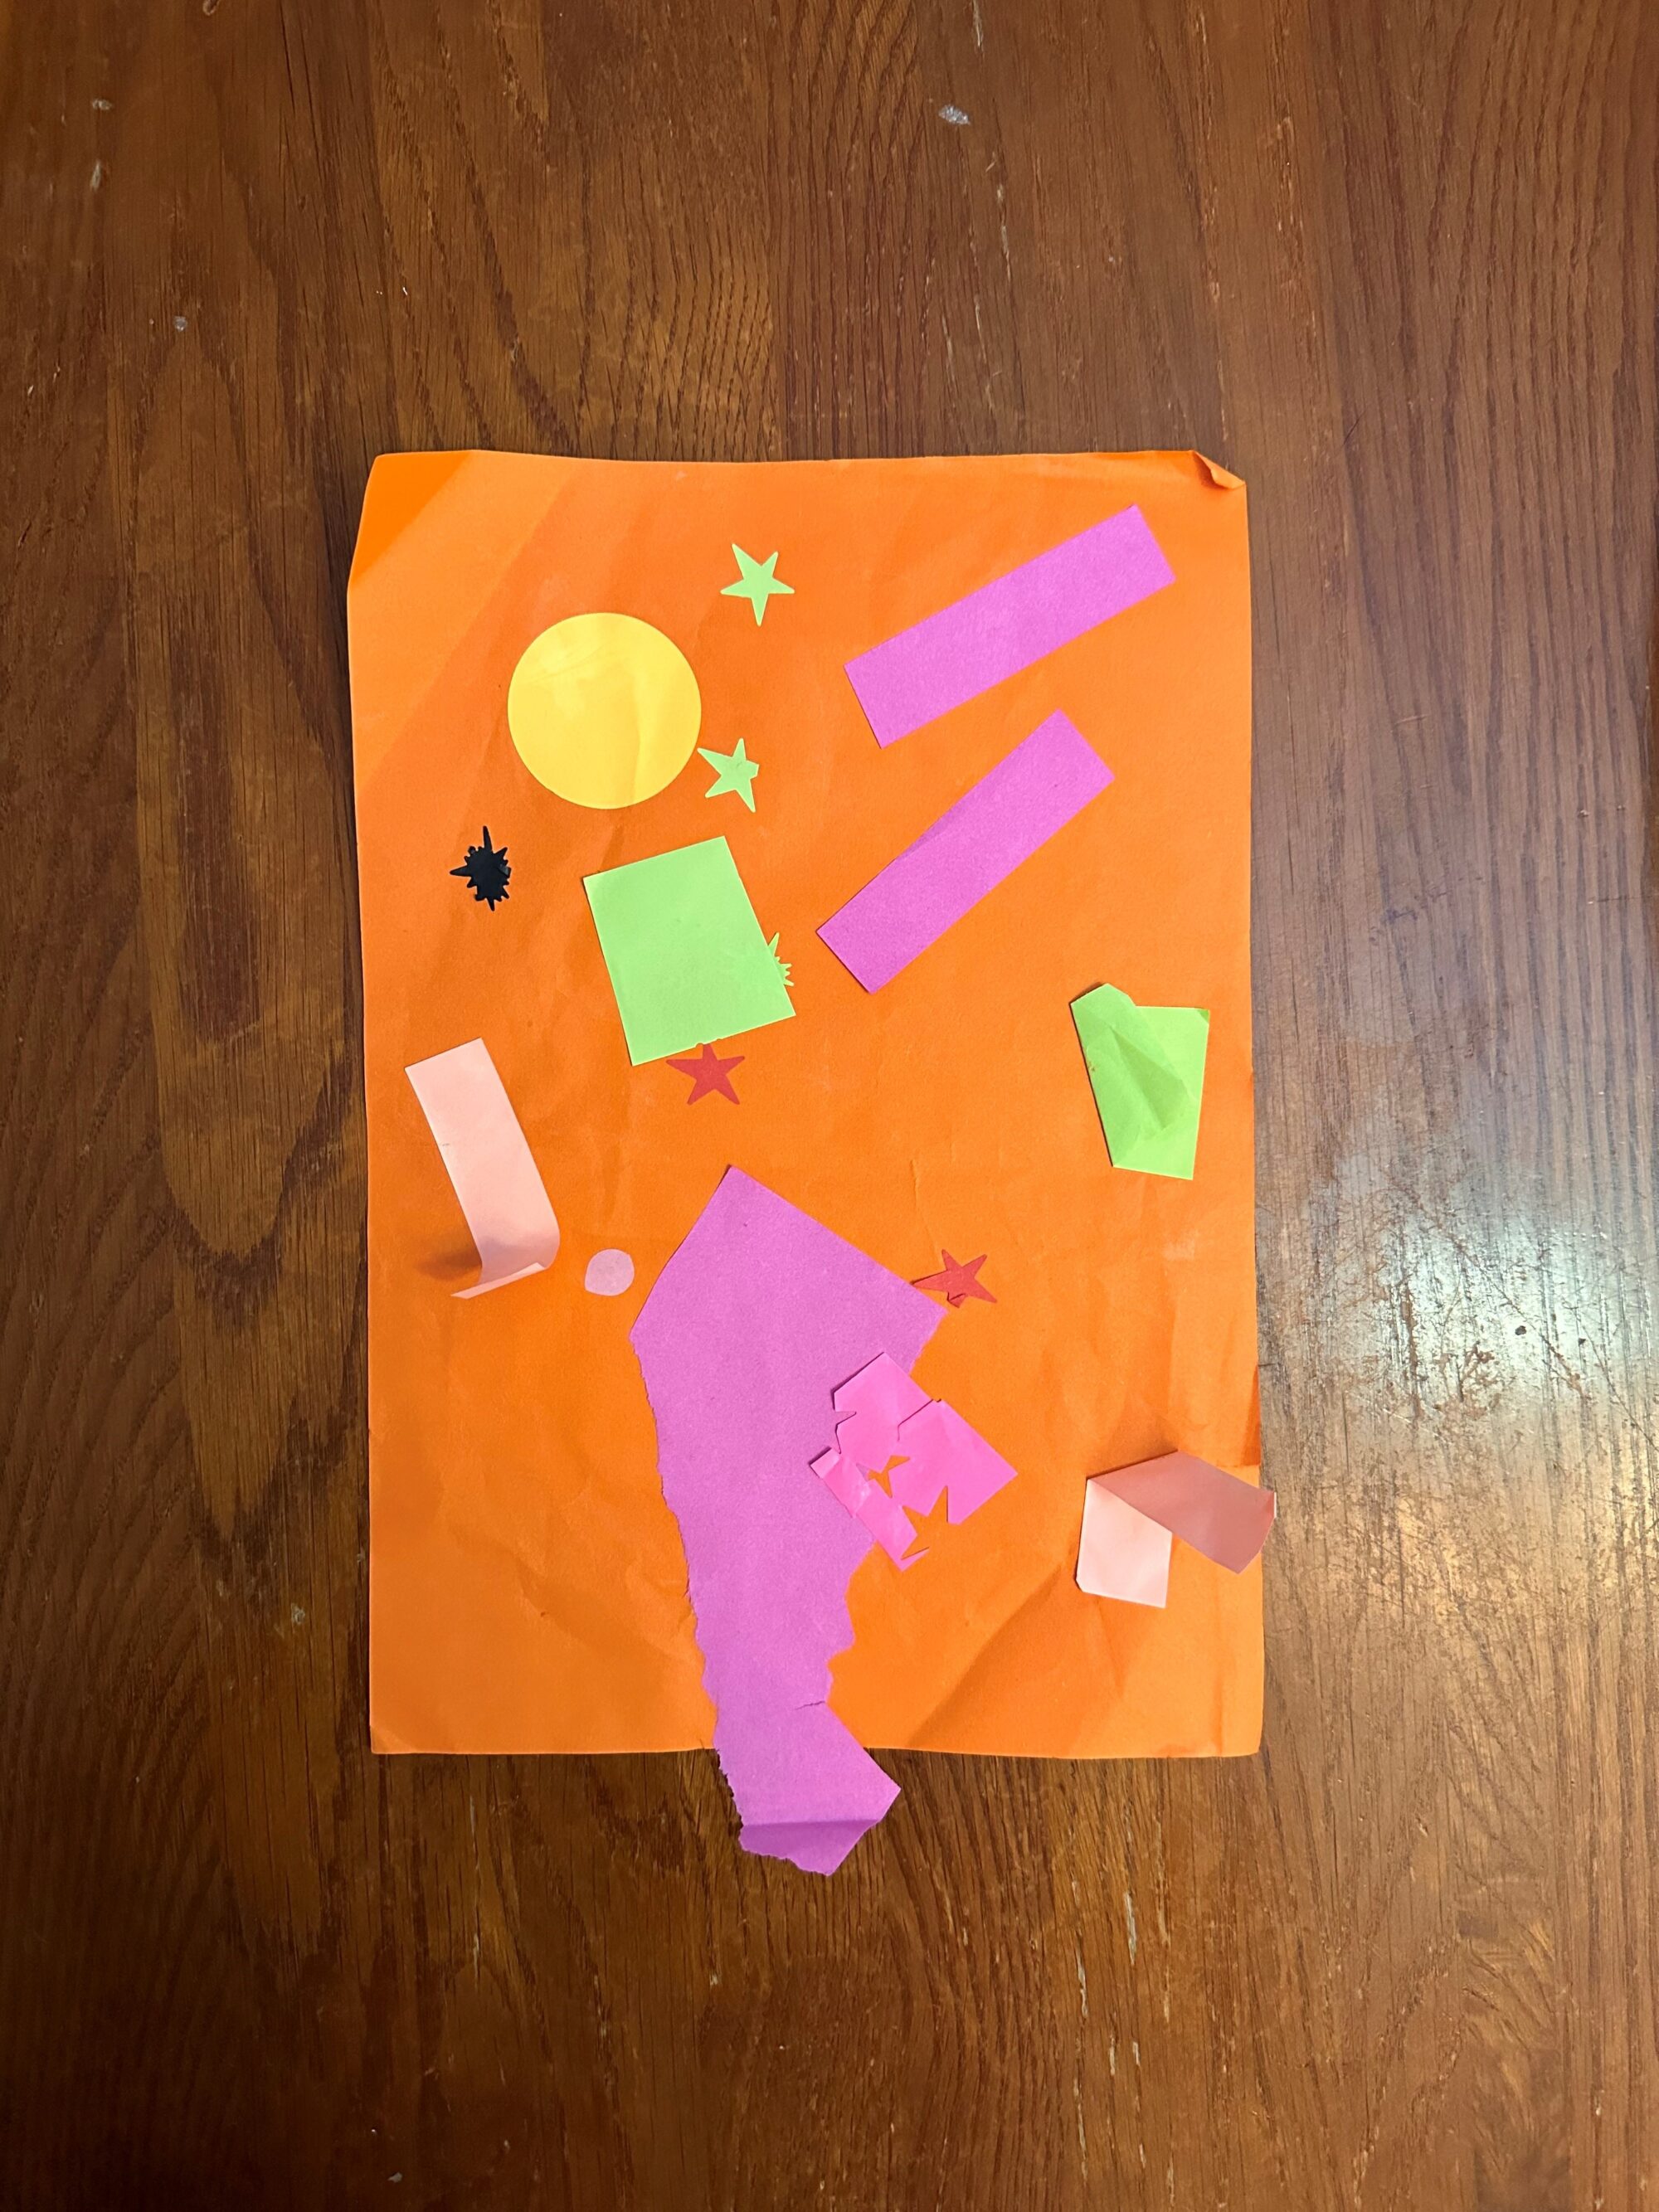 Photo of an orange piece of construction paper with cut paper shapes in various colors pasted on top.